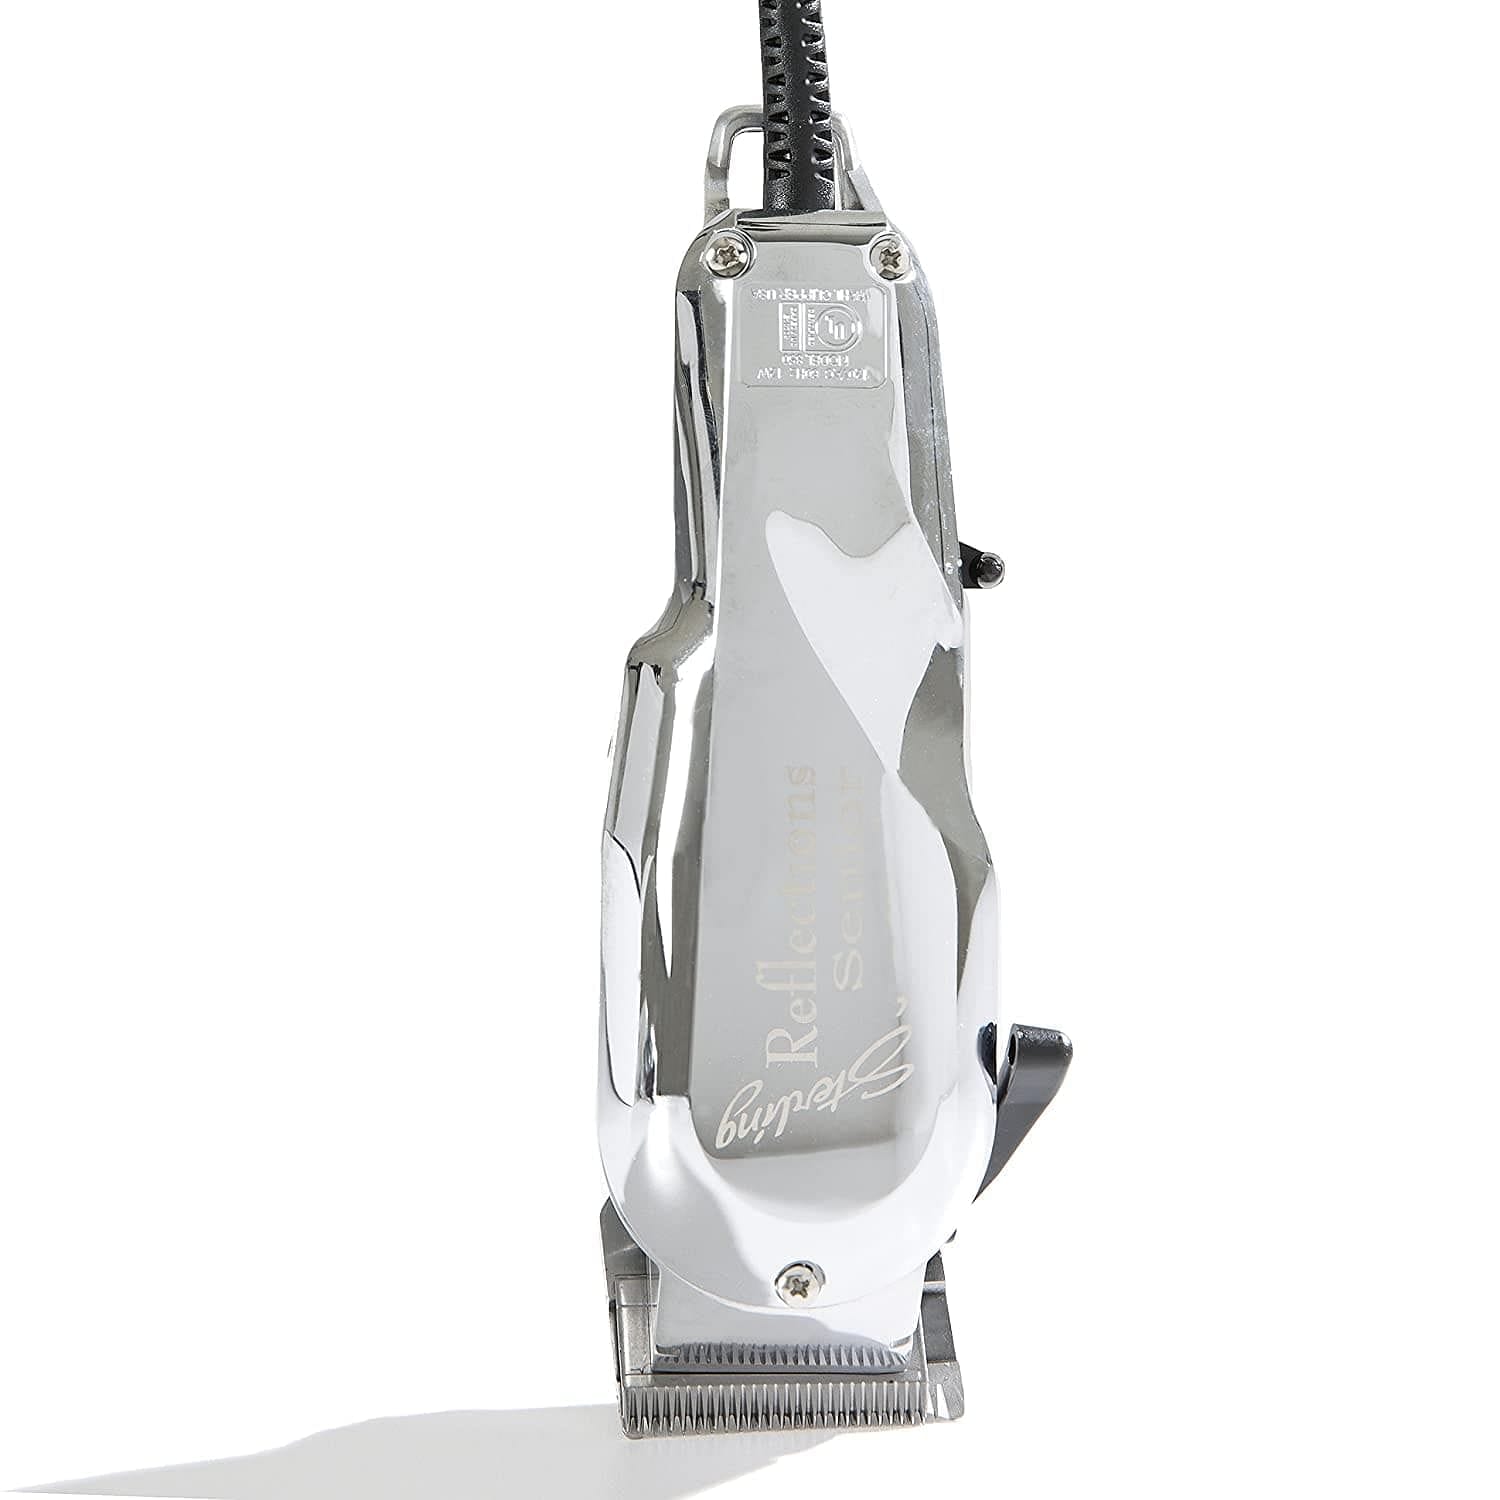 Wahl Sterling Reflections Senior Clipper #8501 - Goldy TV